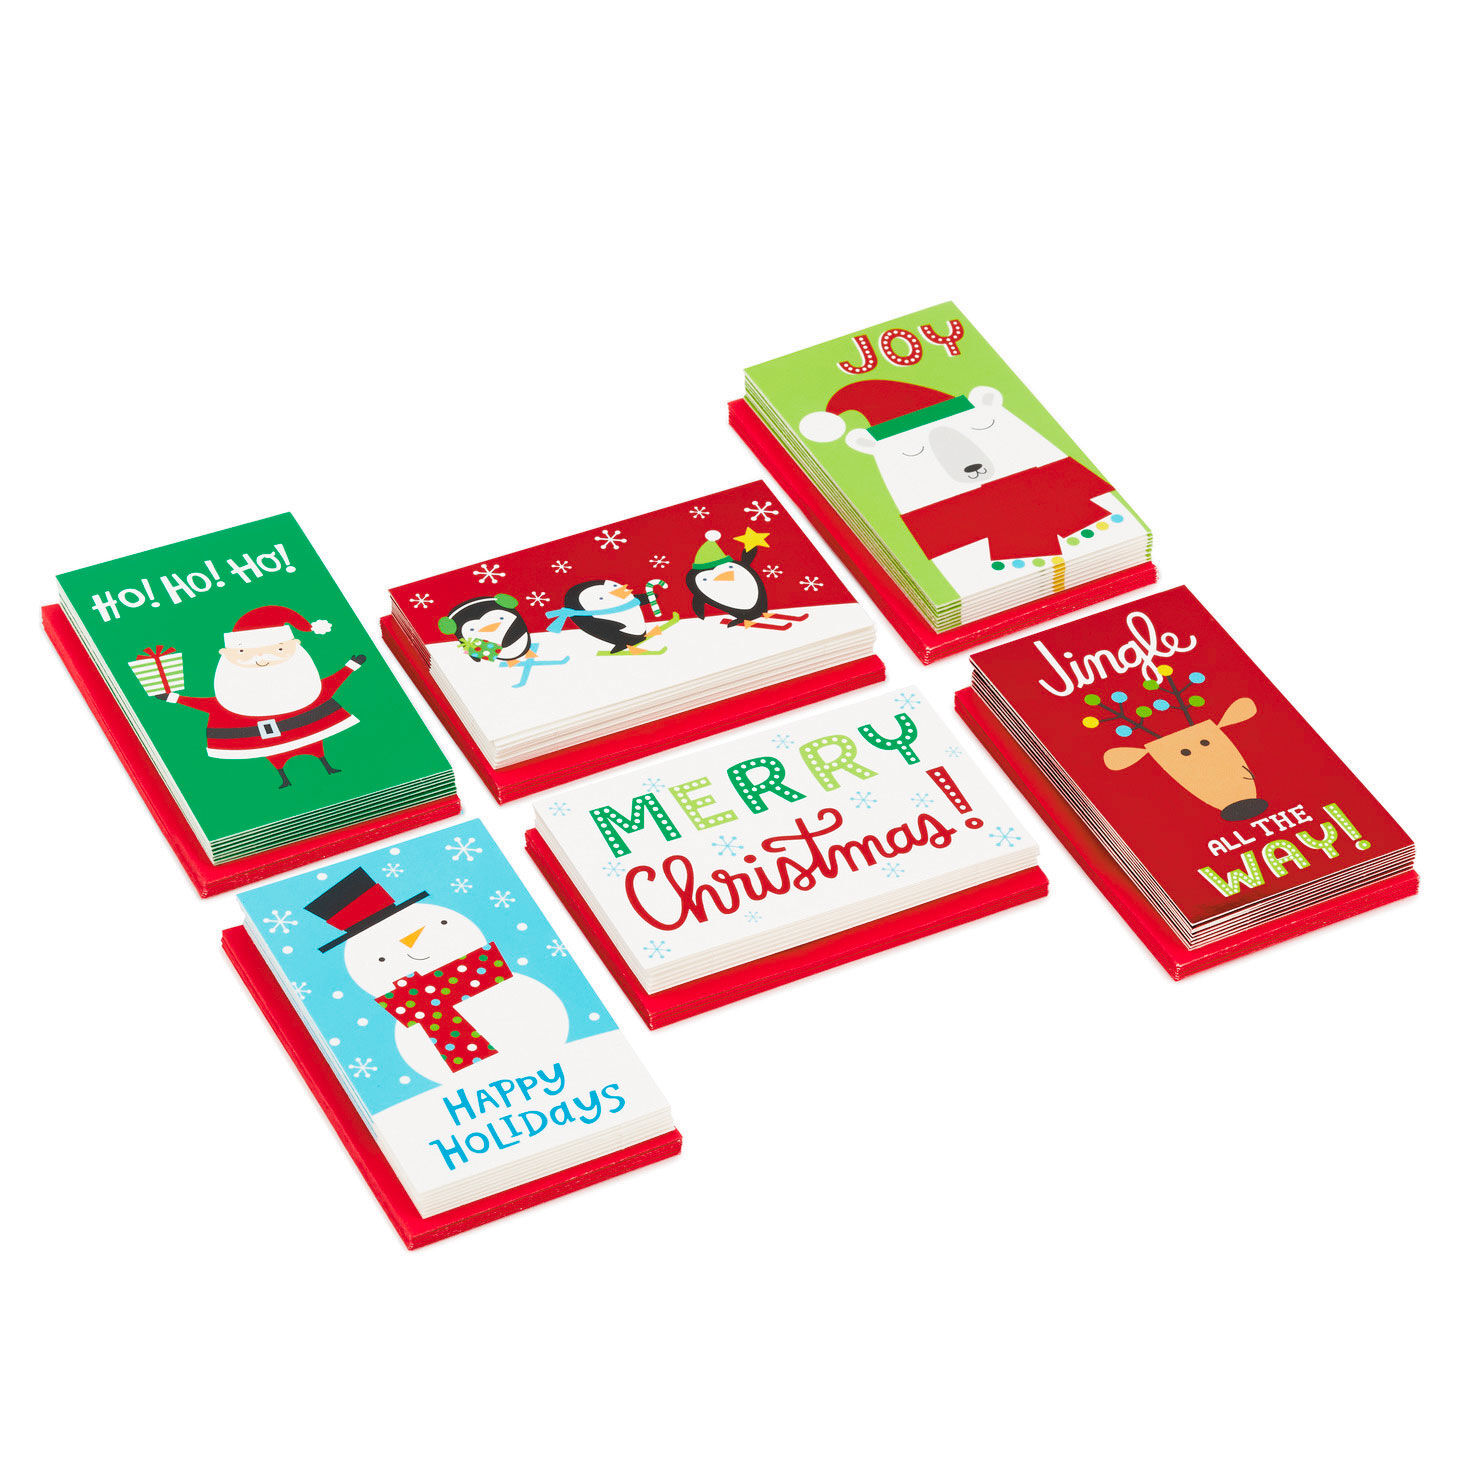 Details about   10 Boxed Merry Christmas Cards with Envelopes Xmas Crackups A1250 